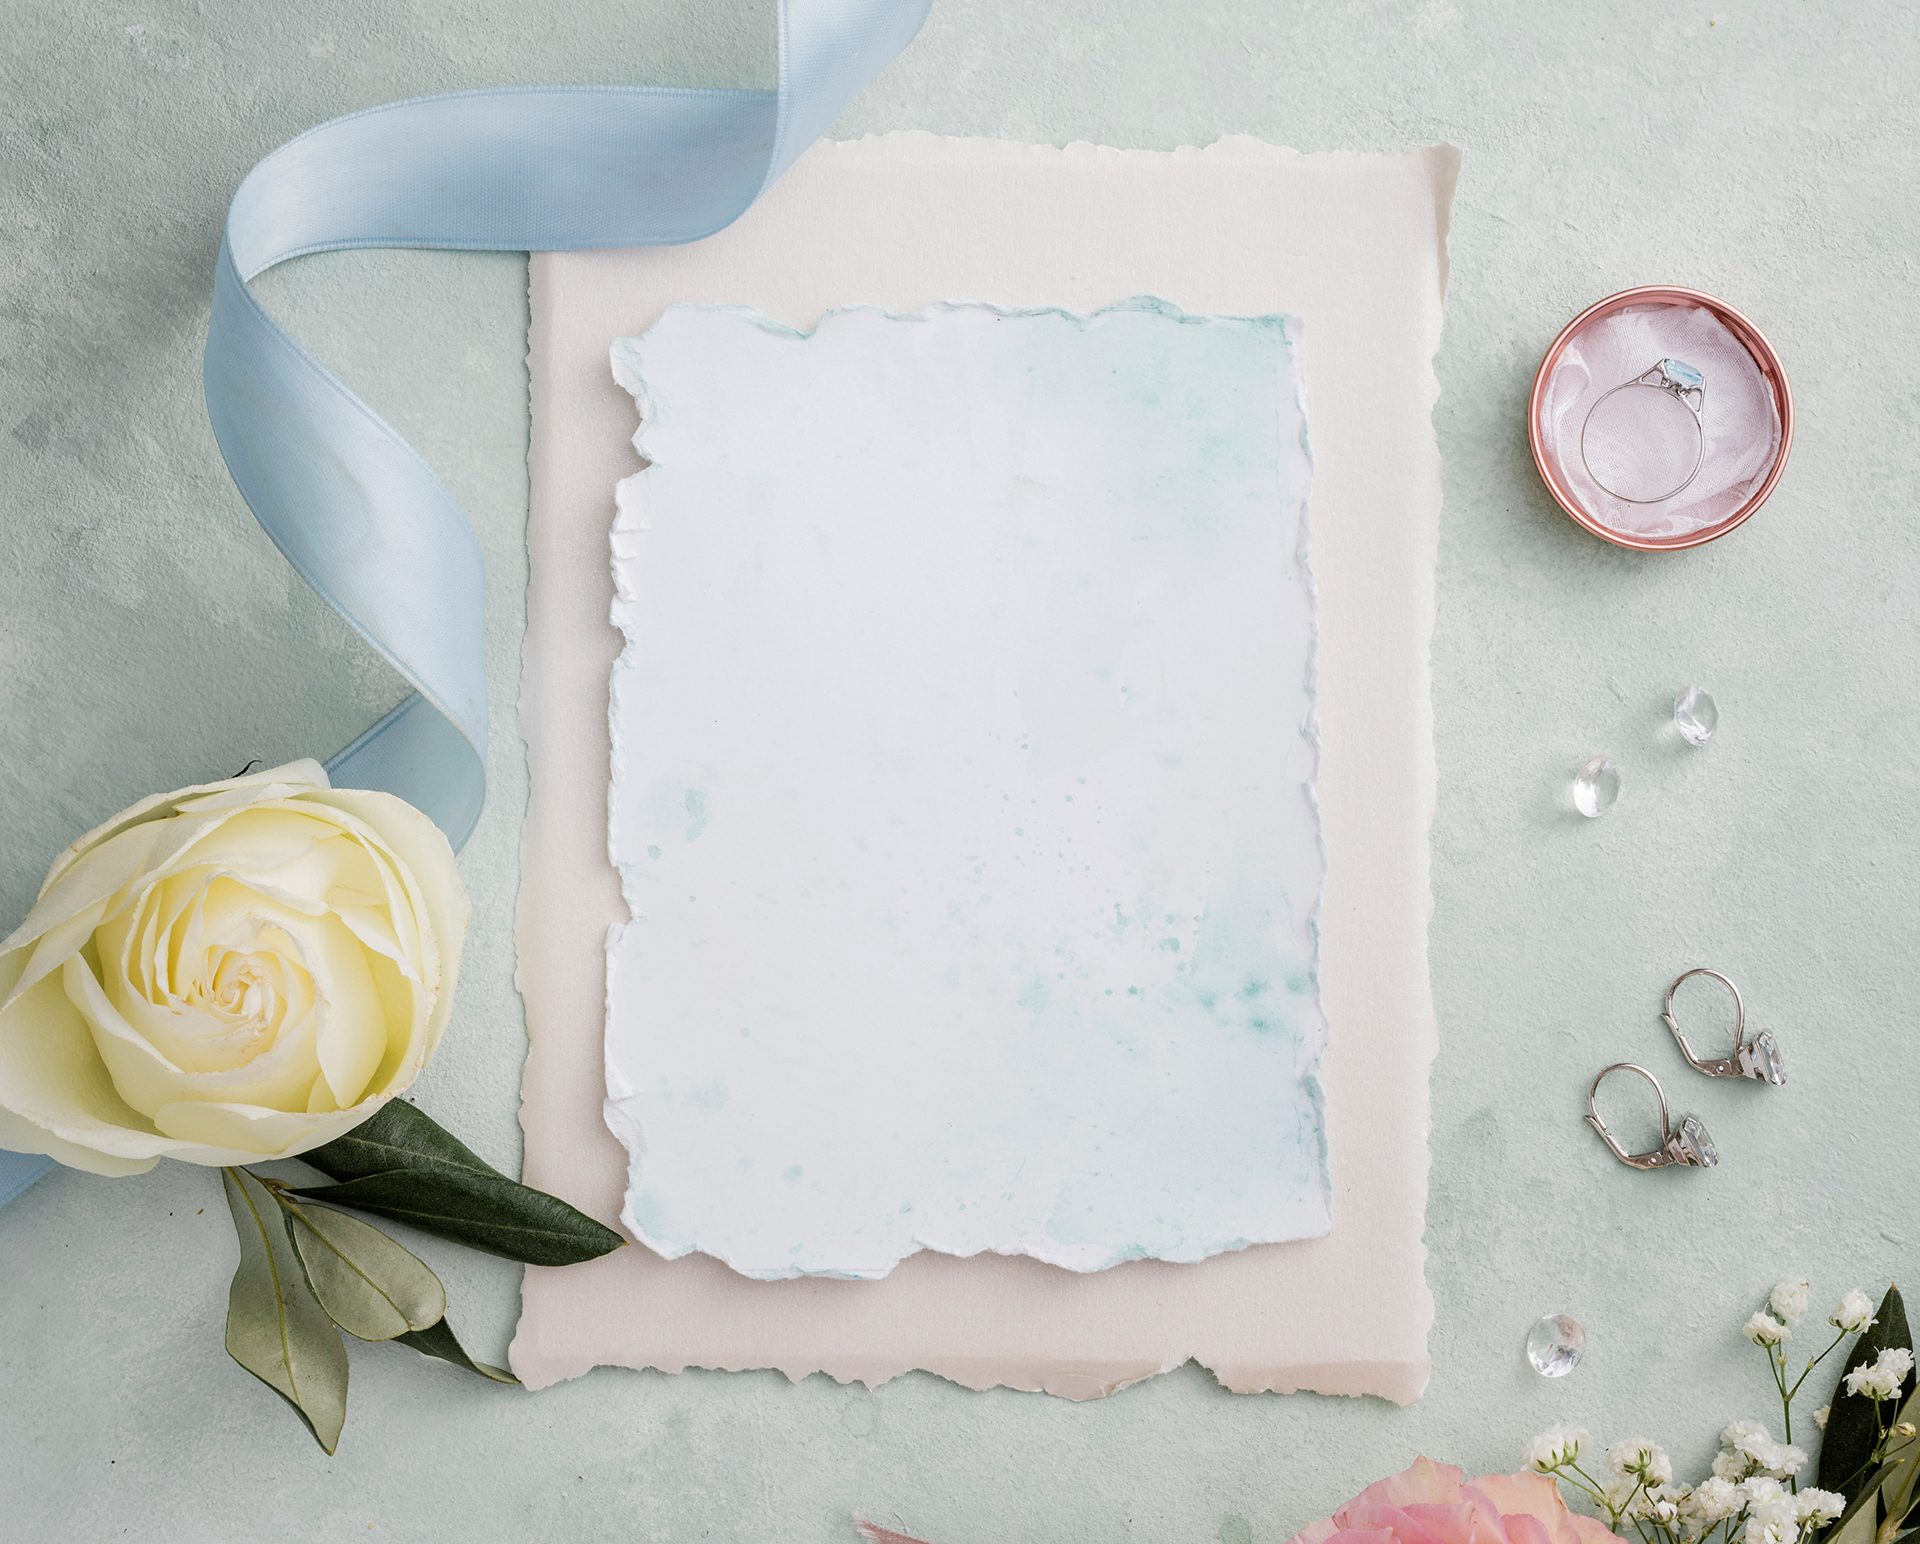 Telling Your Love Story: Personalized Touches That Make Wedding Invitations Shine